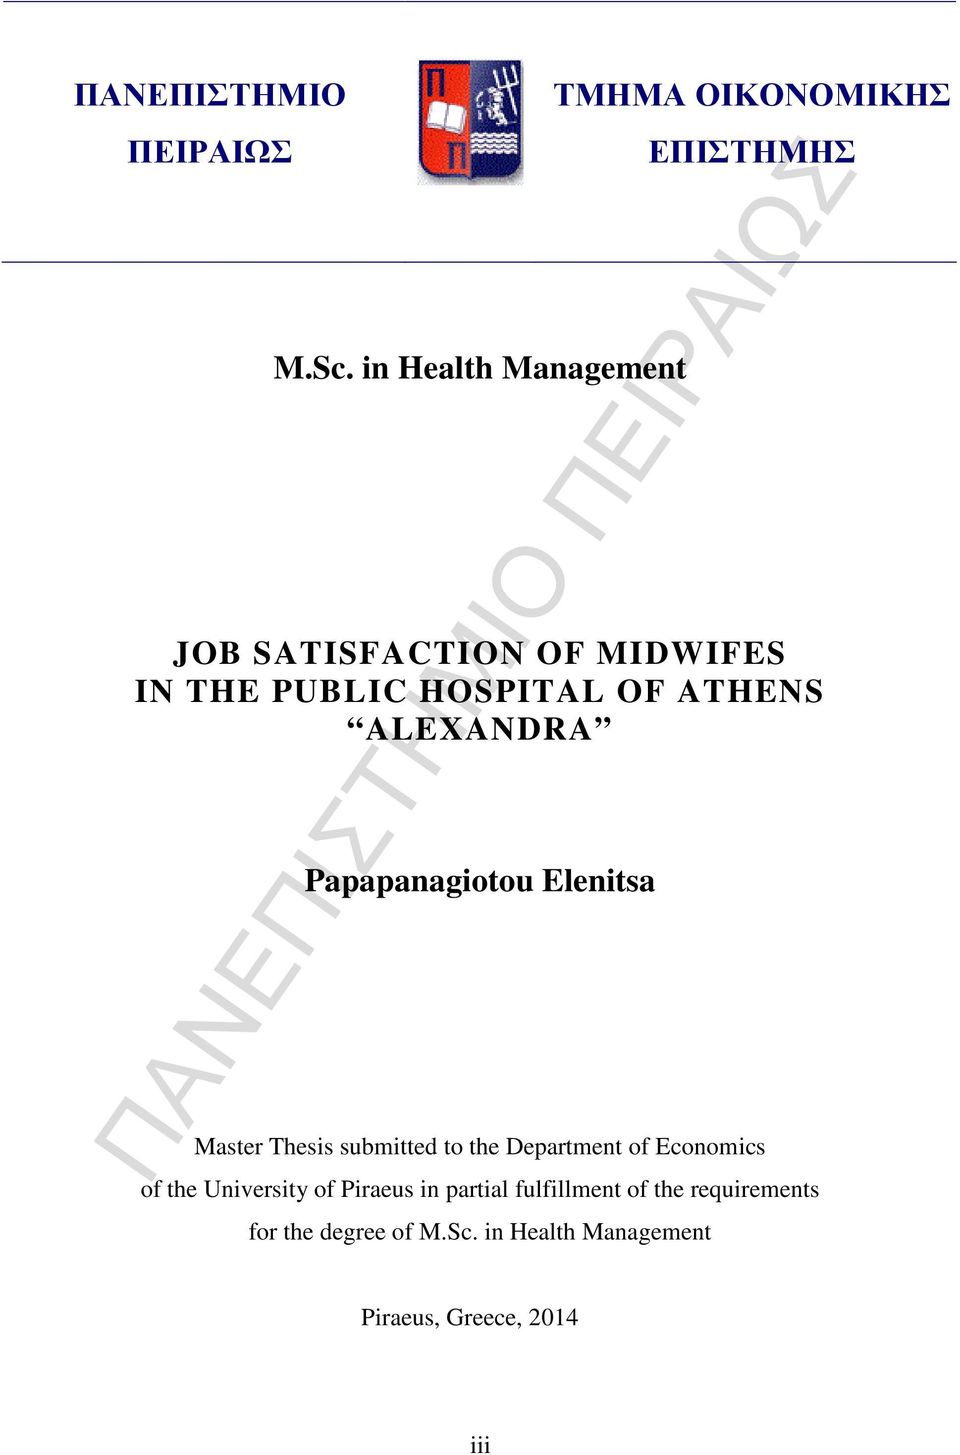 Papapanagiotou Elenitsa Master Thesis submitted to the Department of Economics of the